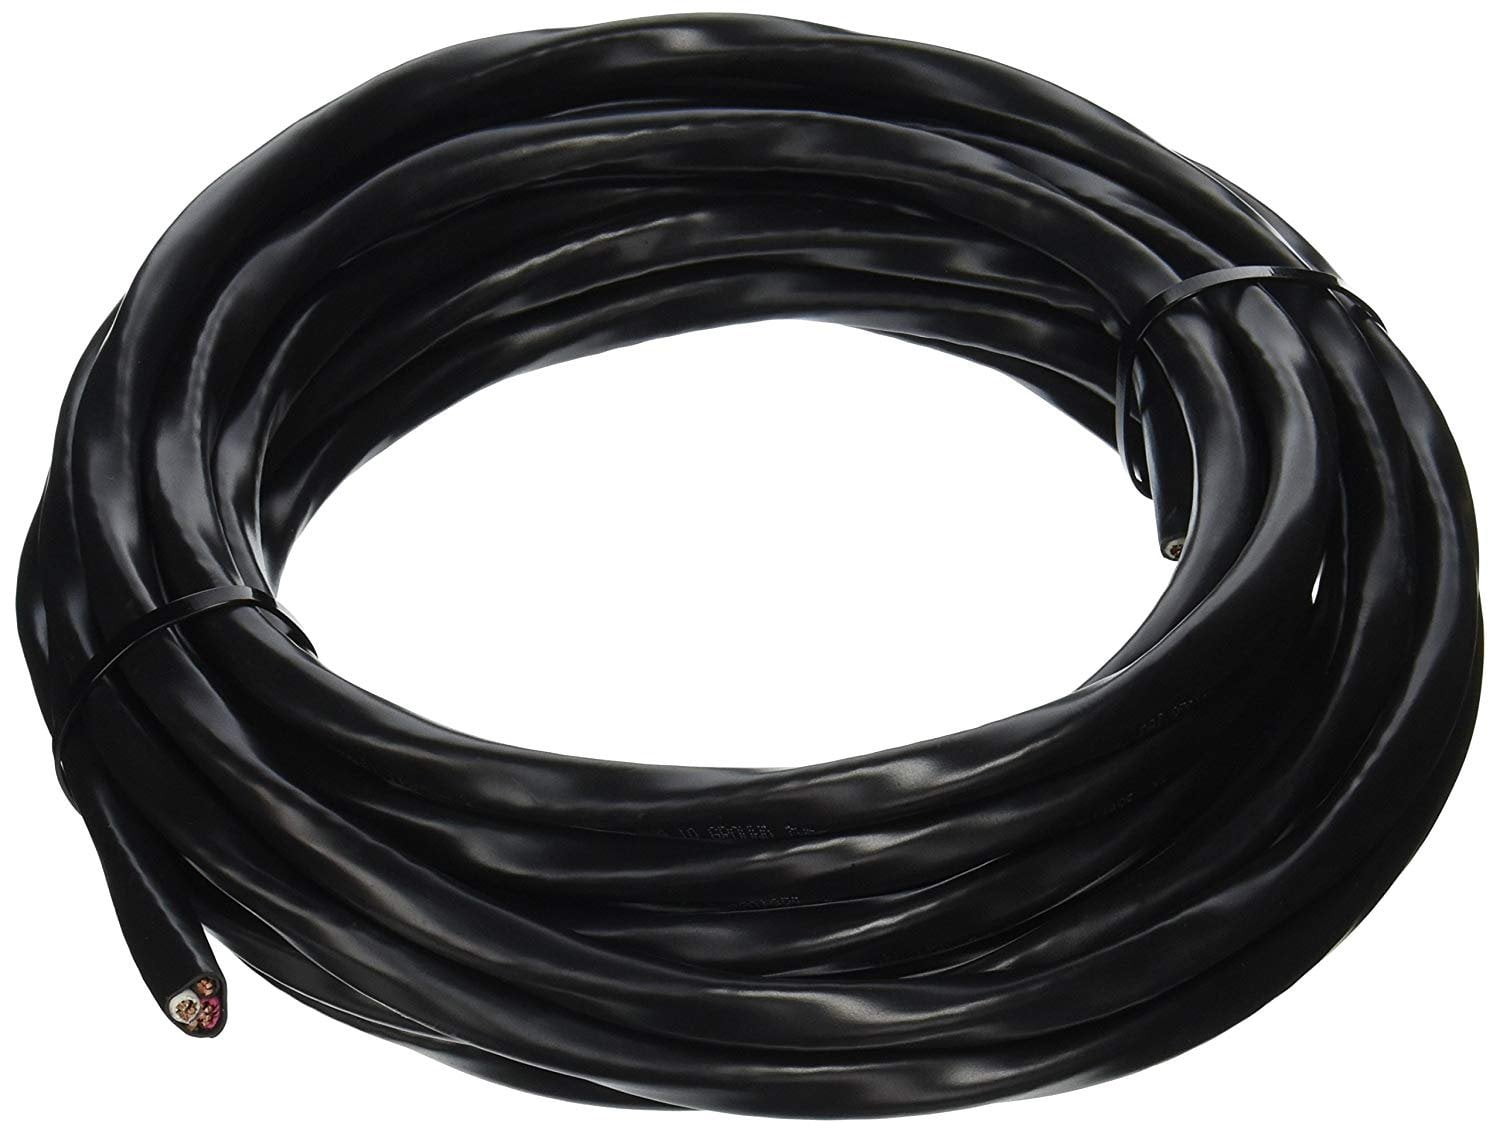 NEW 65' 8/2 W/GROUND NM-B ROMEX HOUSE WIRE/CABLE 